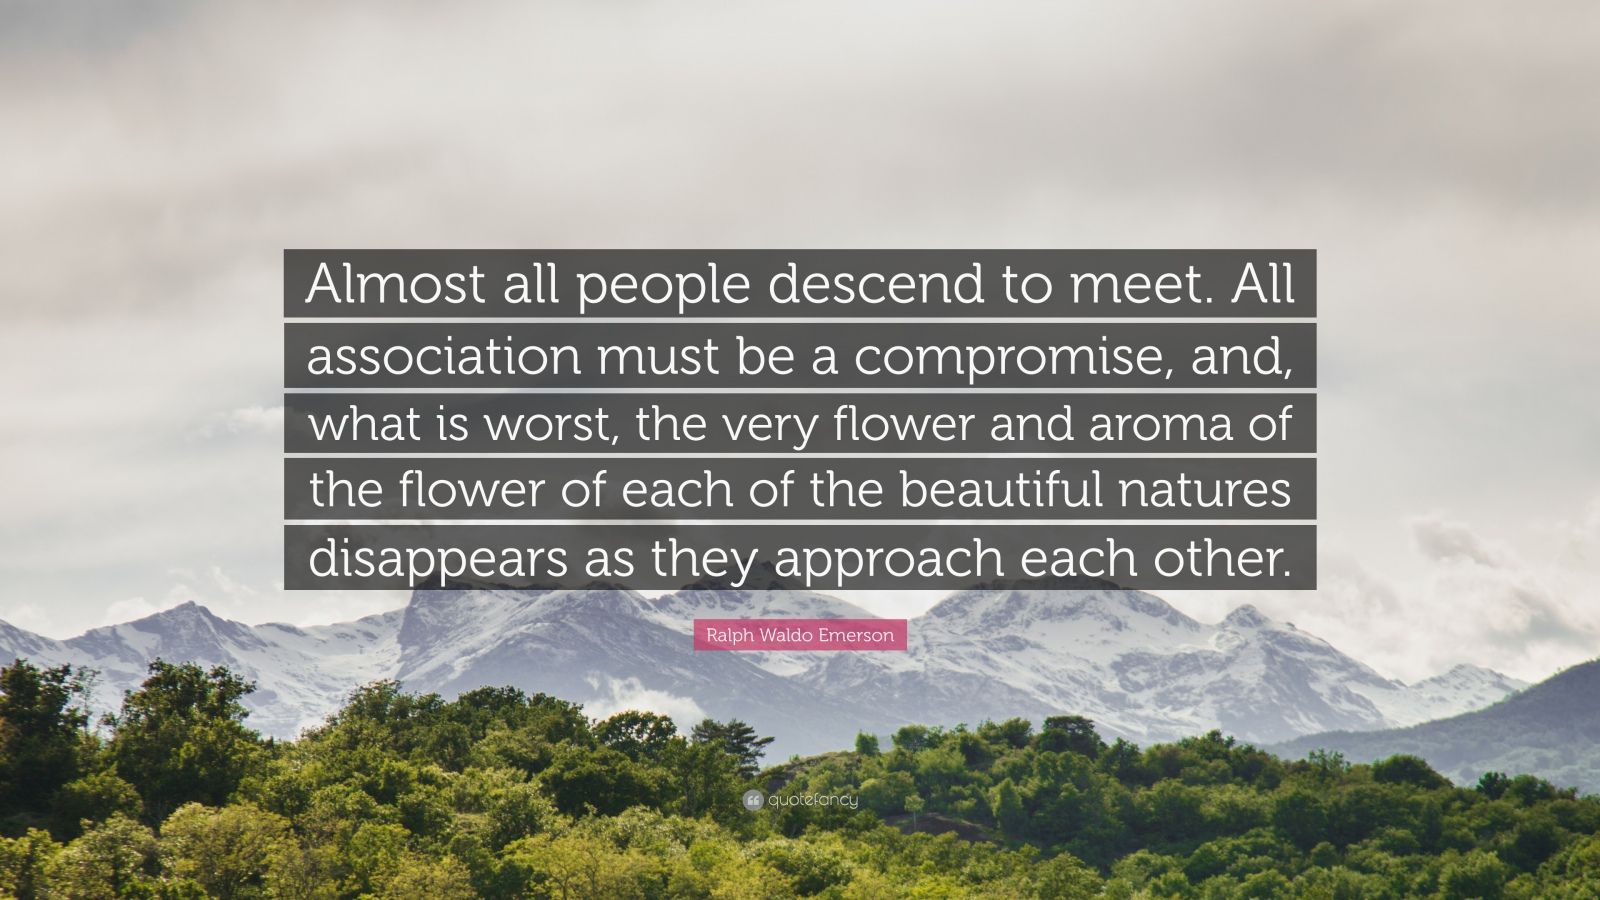 Ralph Waldo Emerson Quote Almost All People Descend To Meet All Association Must Be A Compromise And What Is Worst The Very Flower And Aroma O 7 Wallpapers Quotefancy